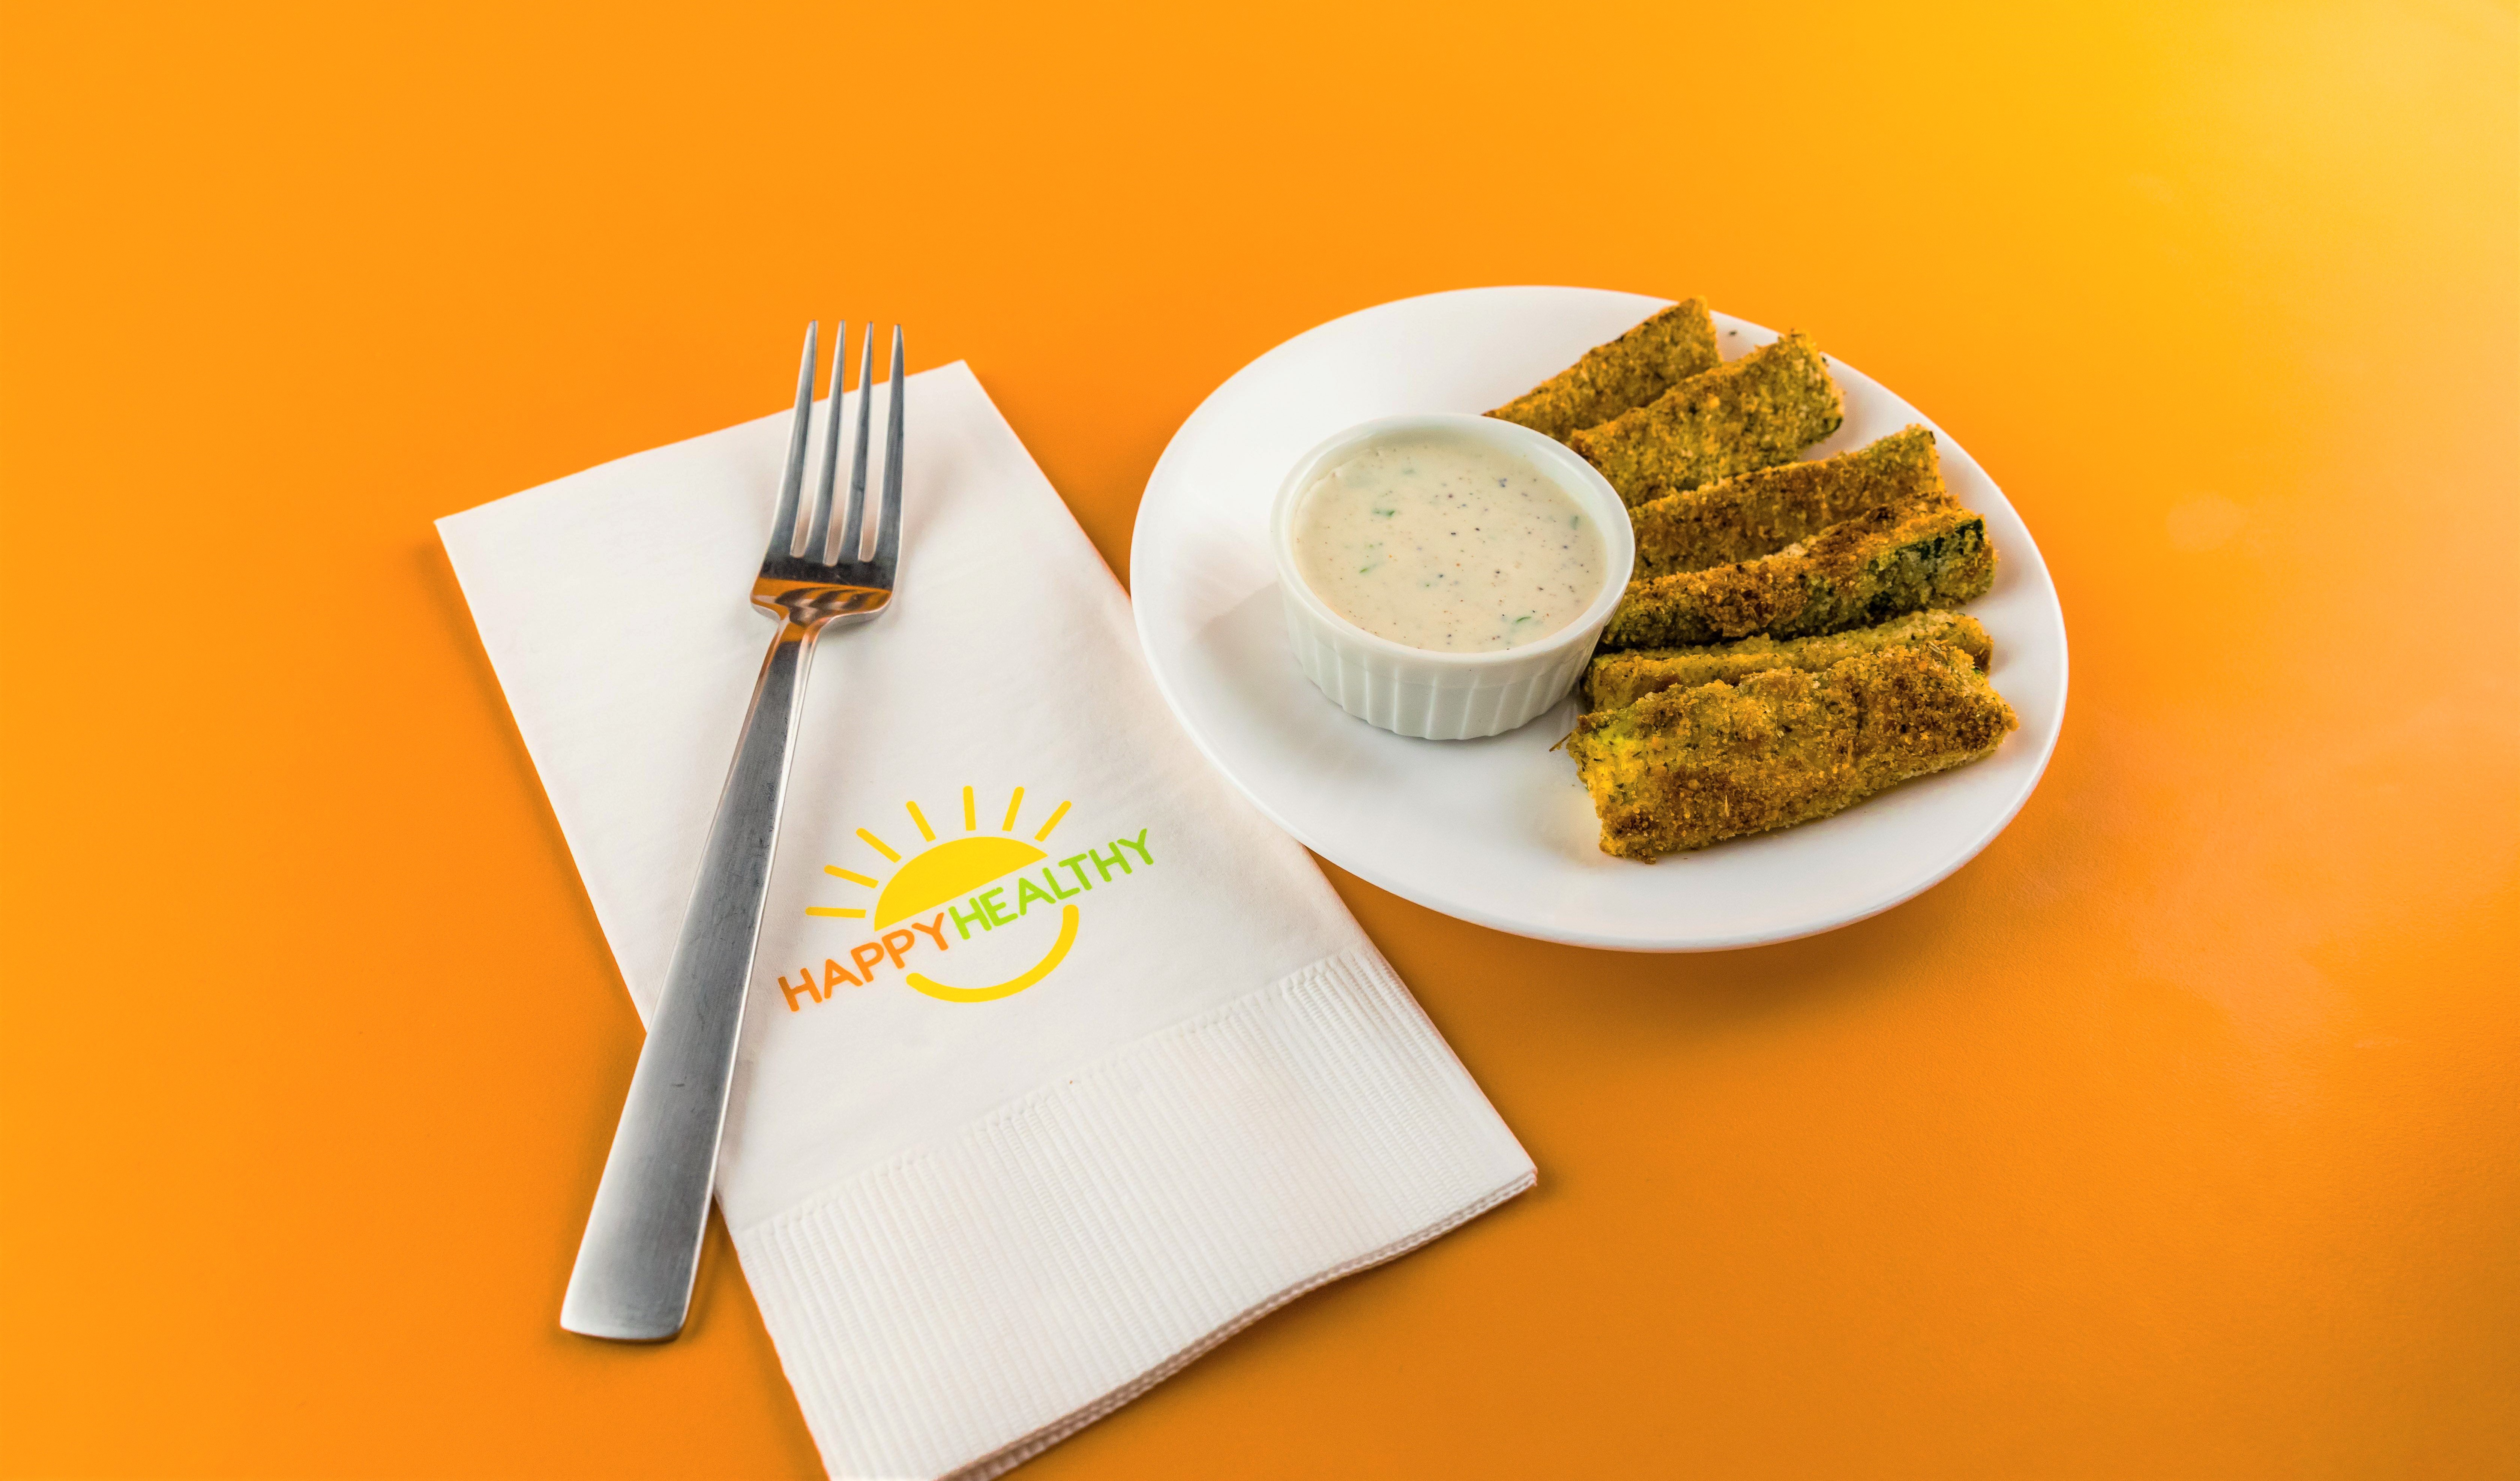 A plate of baked zucchini and ranch dipping sauce next to a plate and HappyHealthy napkin